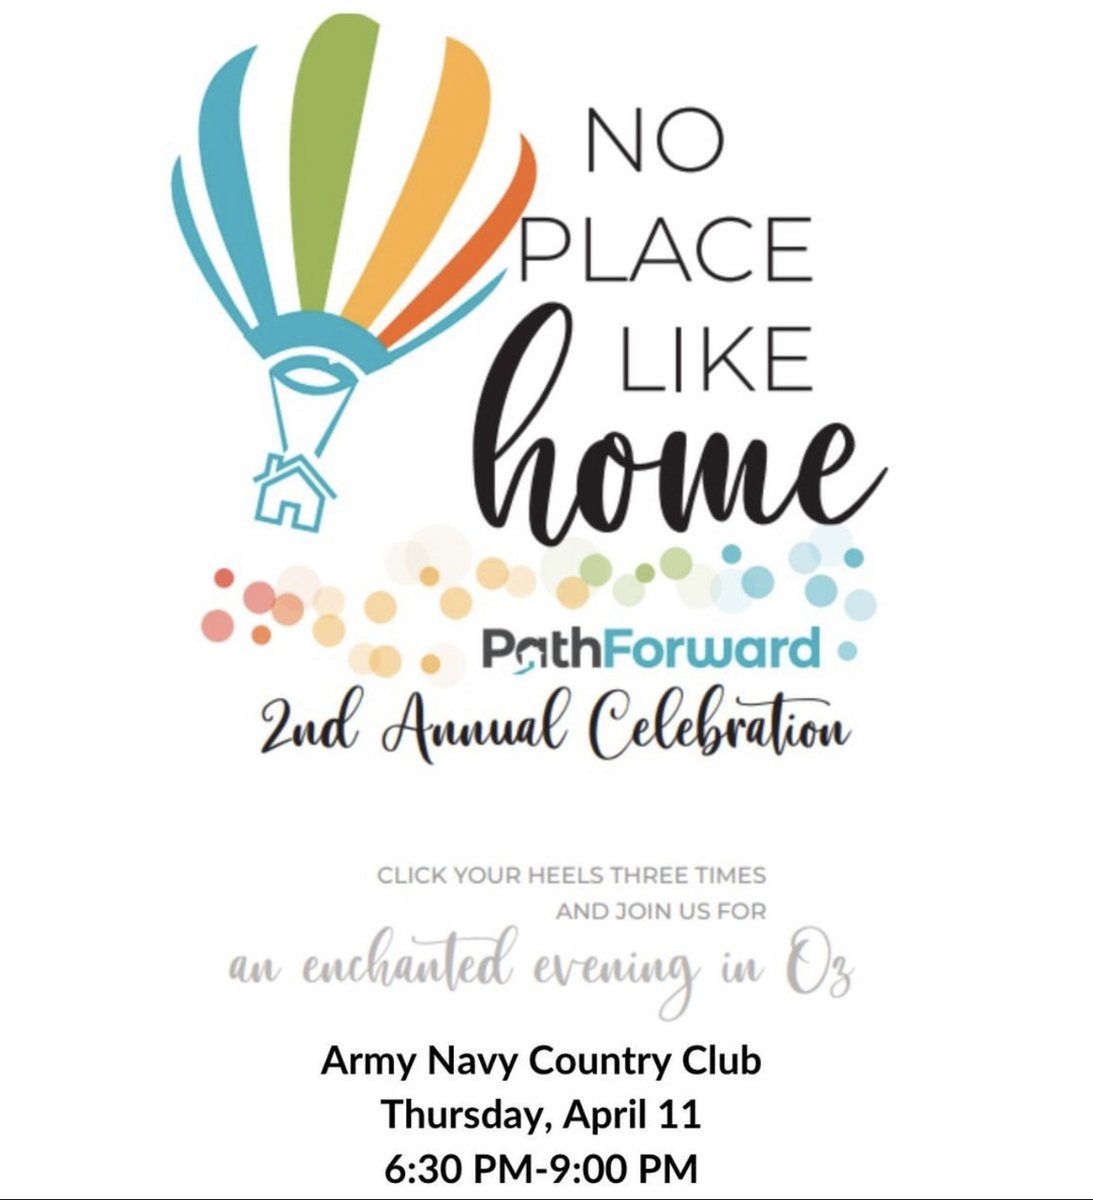 #SaveTheDate On April 11, I will be the emcee at @path4va's No Place Like Home Event at the Army Navy Country Club. Join me at this event and help transform the lives of people experiencing homelessness. 💙 Purchase your tickets ⤵️ pfva.org/no-place-like-…